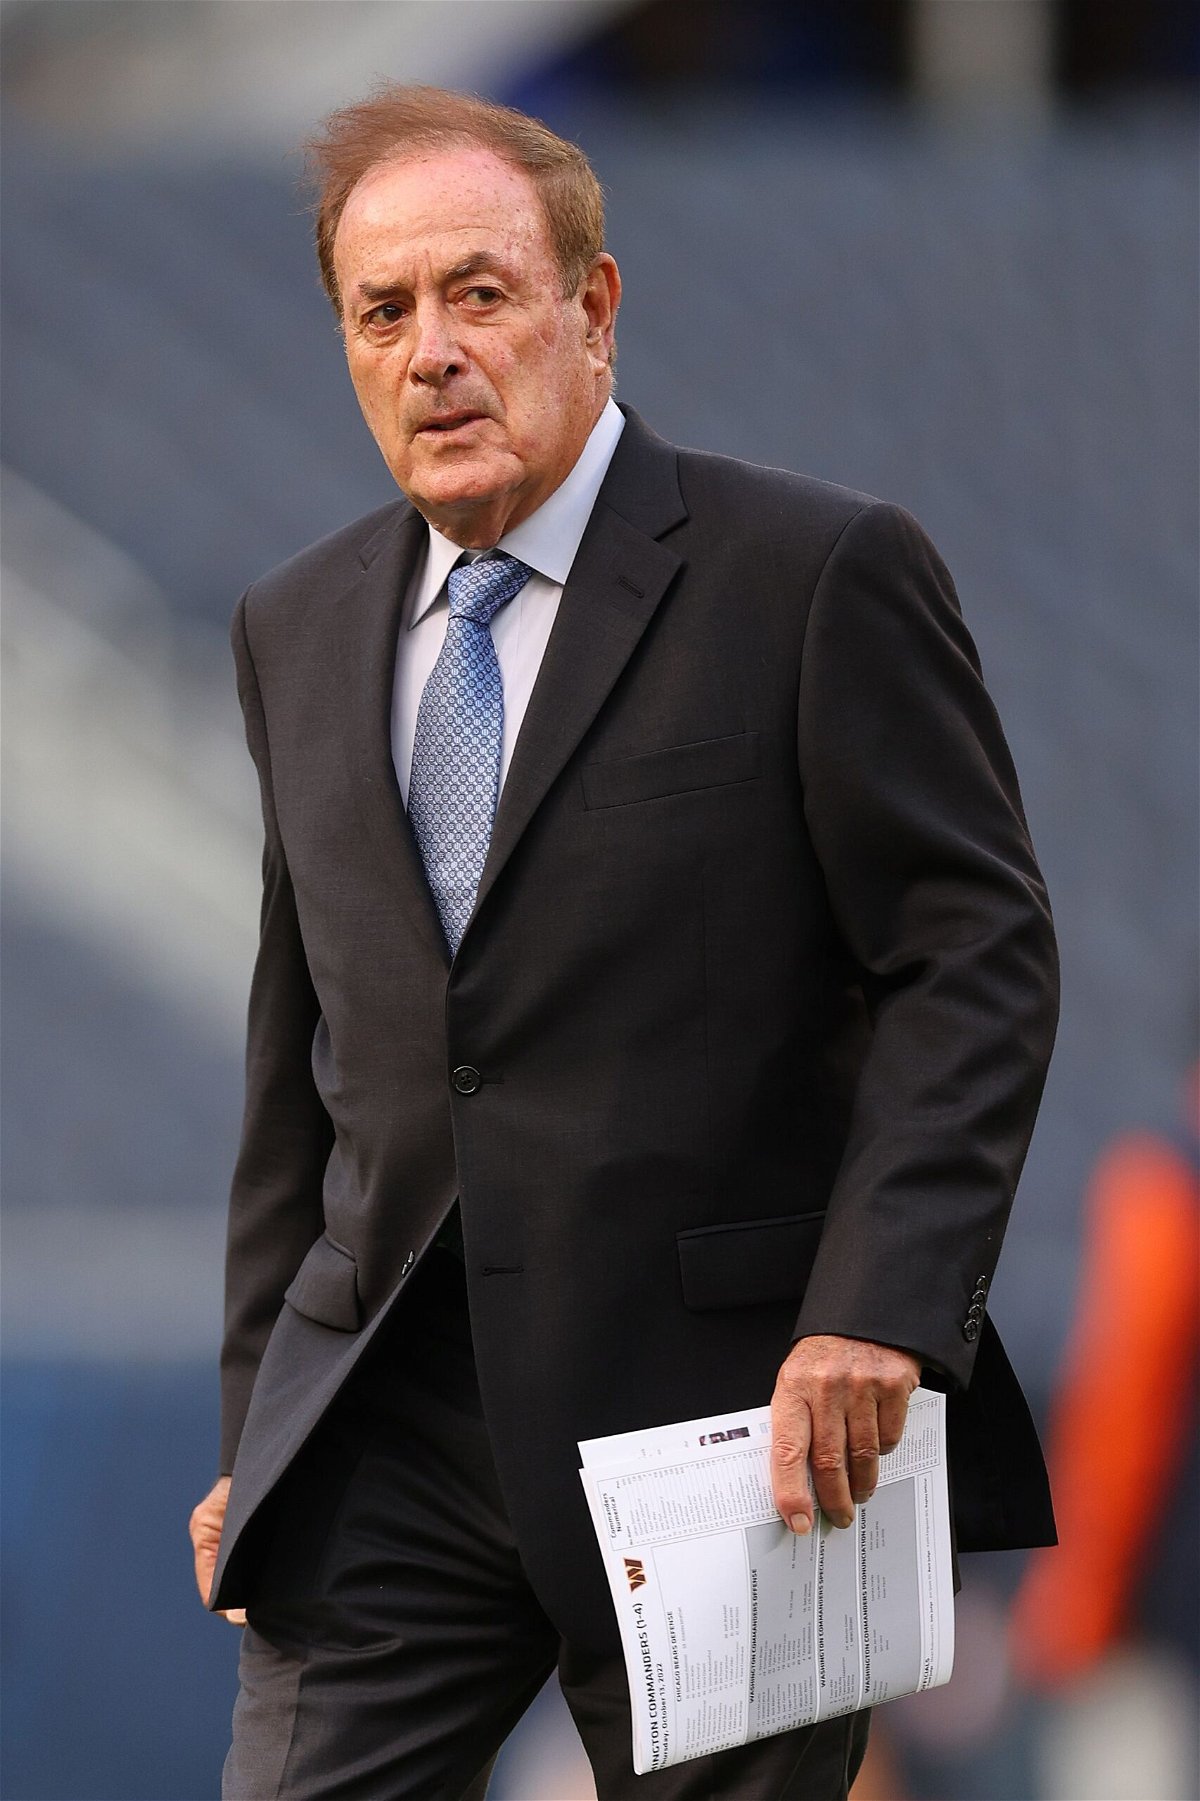 <i>Michael Reaves/Getty Images via CNN Newsource</i><br/>Sports commentator Al Michaels looks on prior to the game between the Chicago Bears and the Washington Commanders at Soldier Field in October 2022 in Chicago